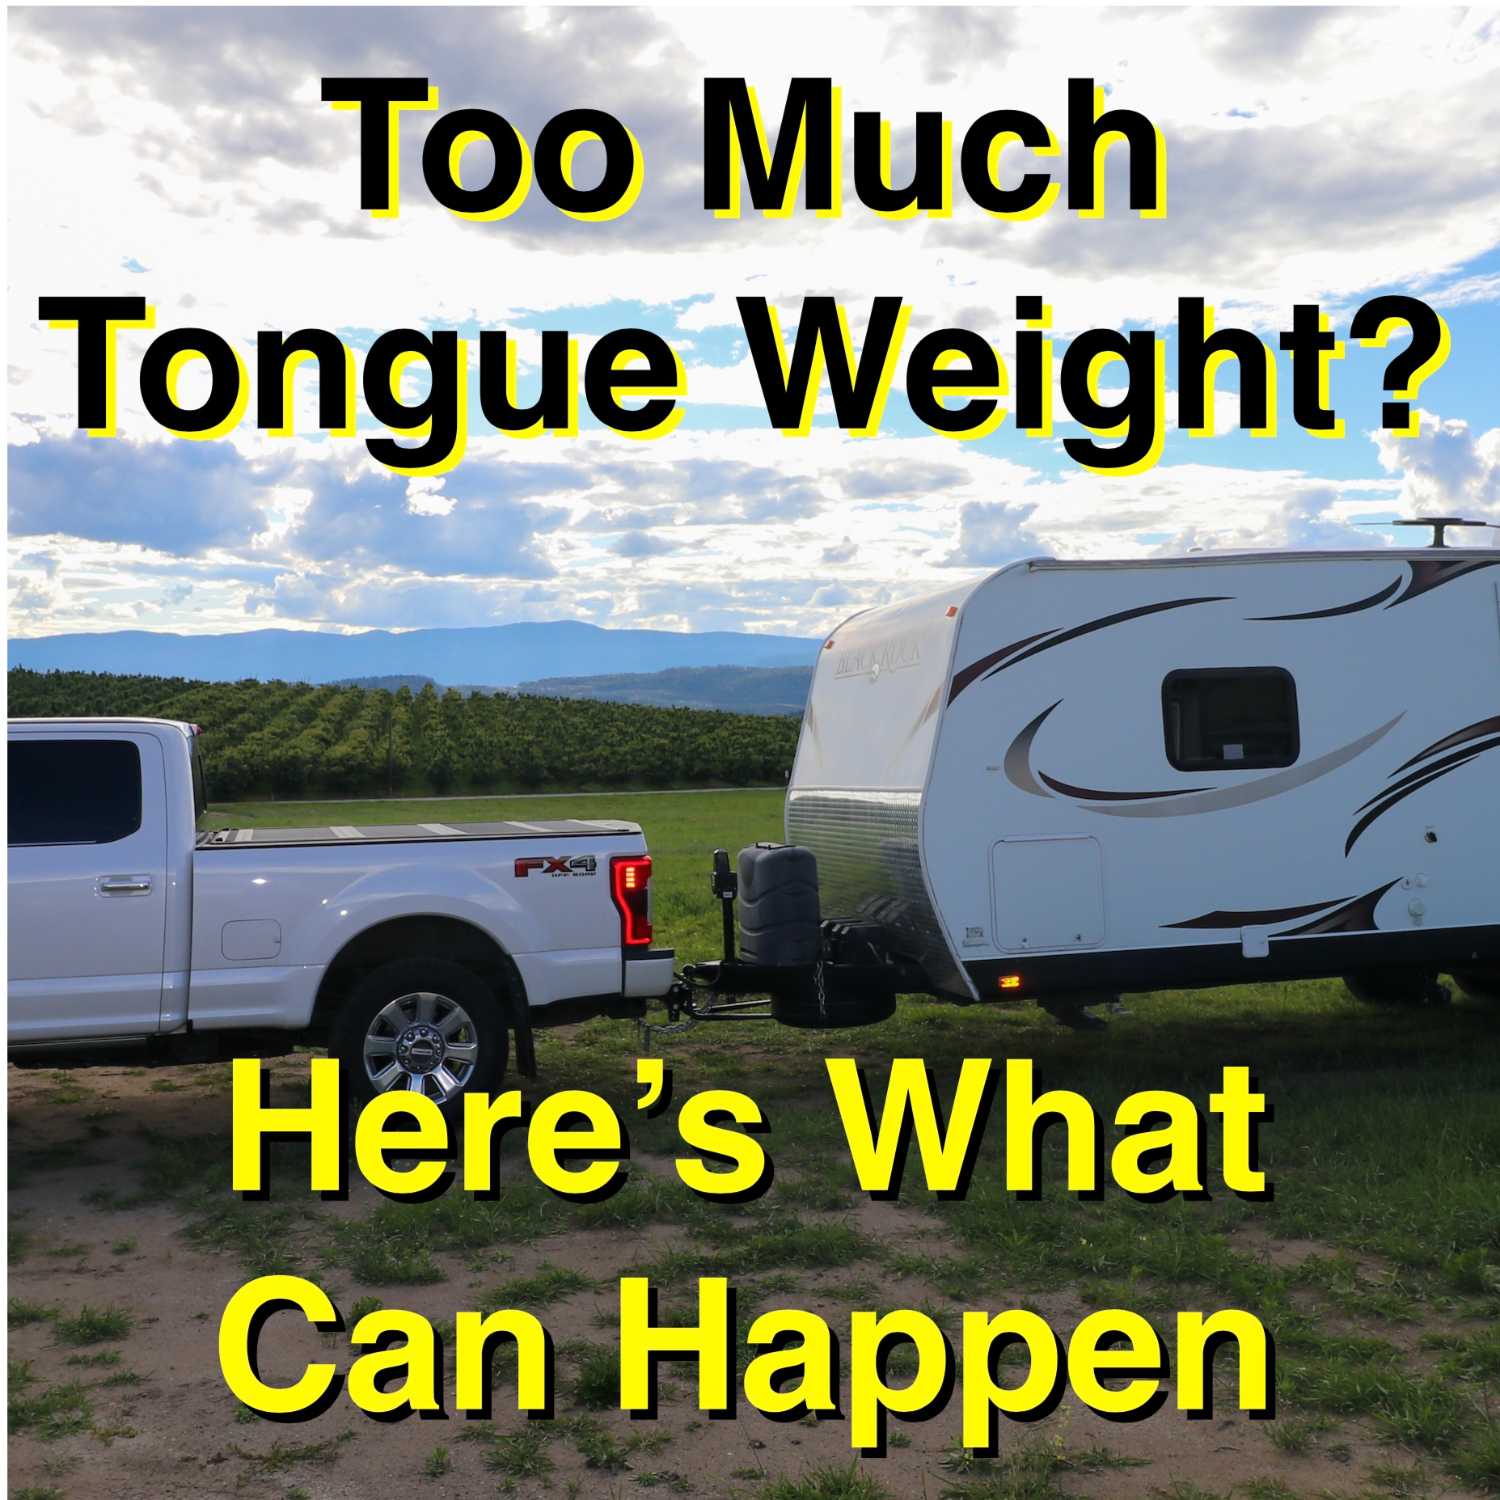 7 Risks of Not Measuring Tongue Weight